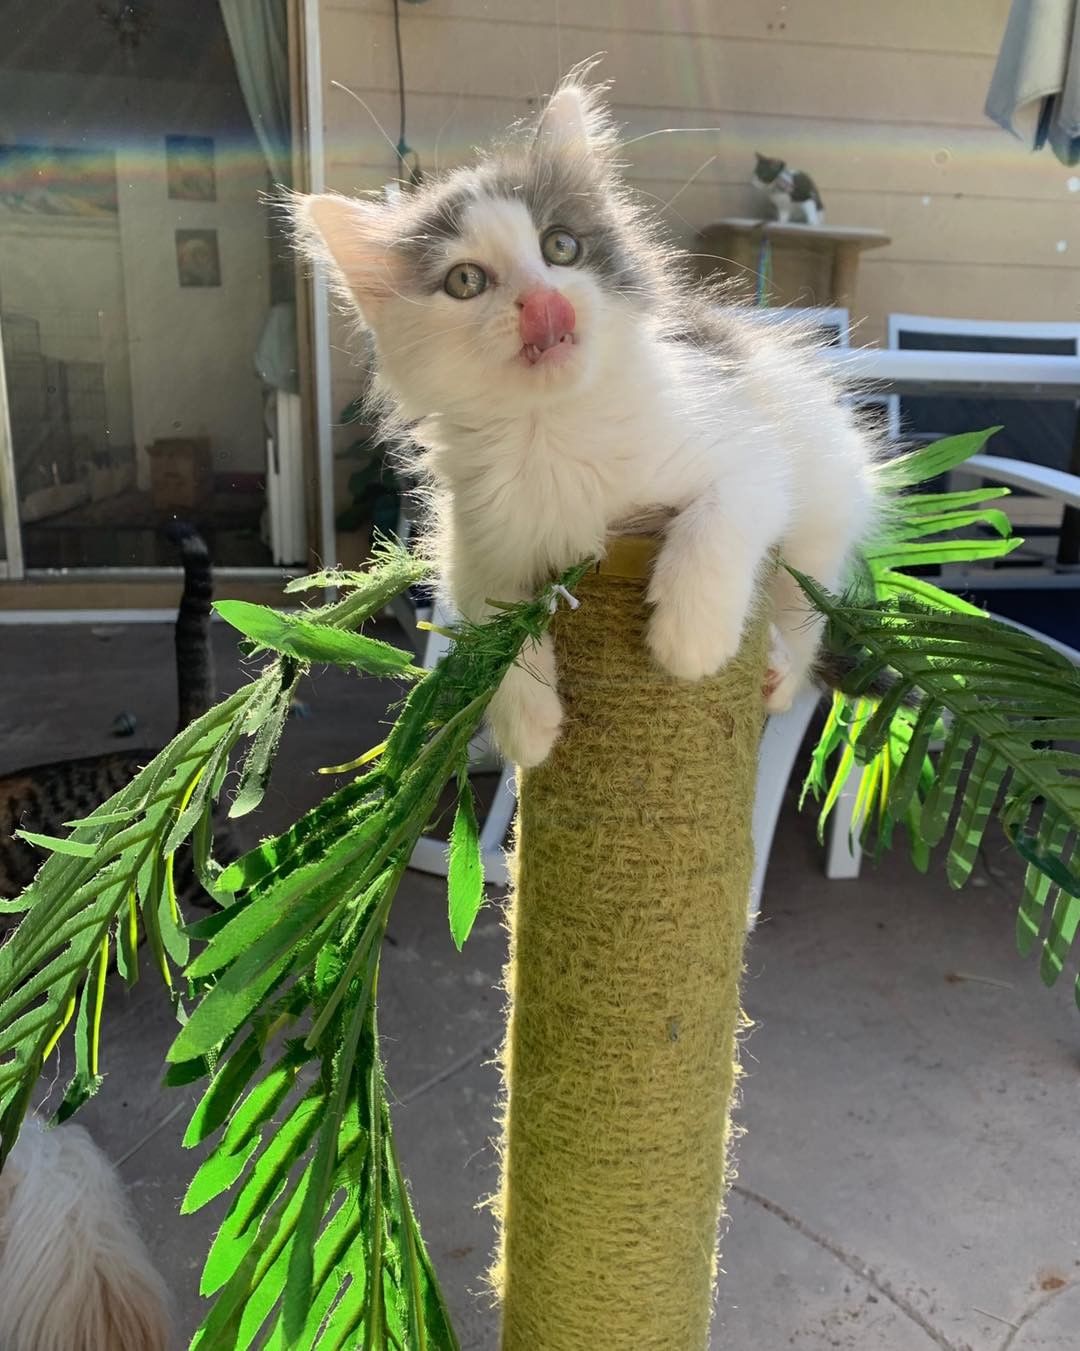 Sweet Yeti has been testing out her climbing skills while enjoying this cooler weather outside! We just can’t get enough of this cutie! 

She is currently hanging out in one of our awesome foster homes until she is ready for adoption!

 <a target='_blank' href='https://www.instagram.com/explore/tags/fosterkittens/'>#fosterkittens</a> <a target='_blank' href='https://www.instagram.com/explore/tags/fosteringsaveslives/'>#fosteringsaveslives</a>